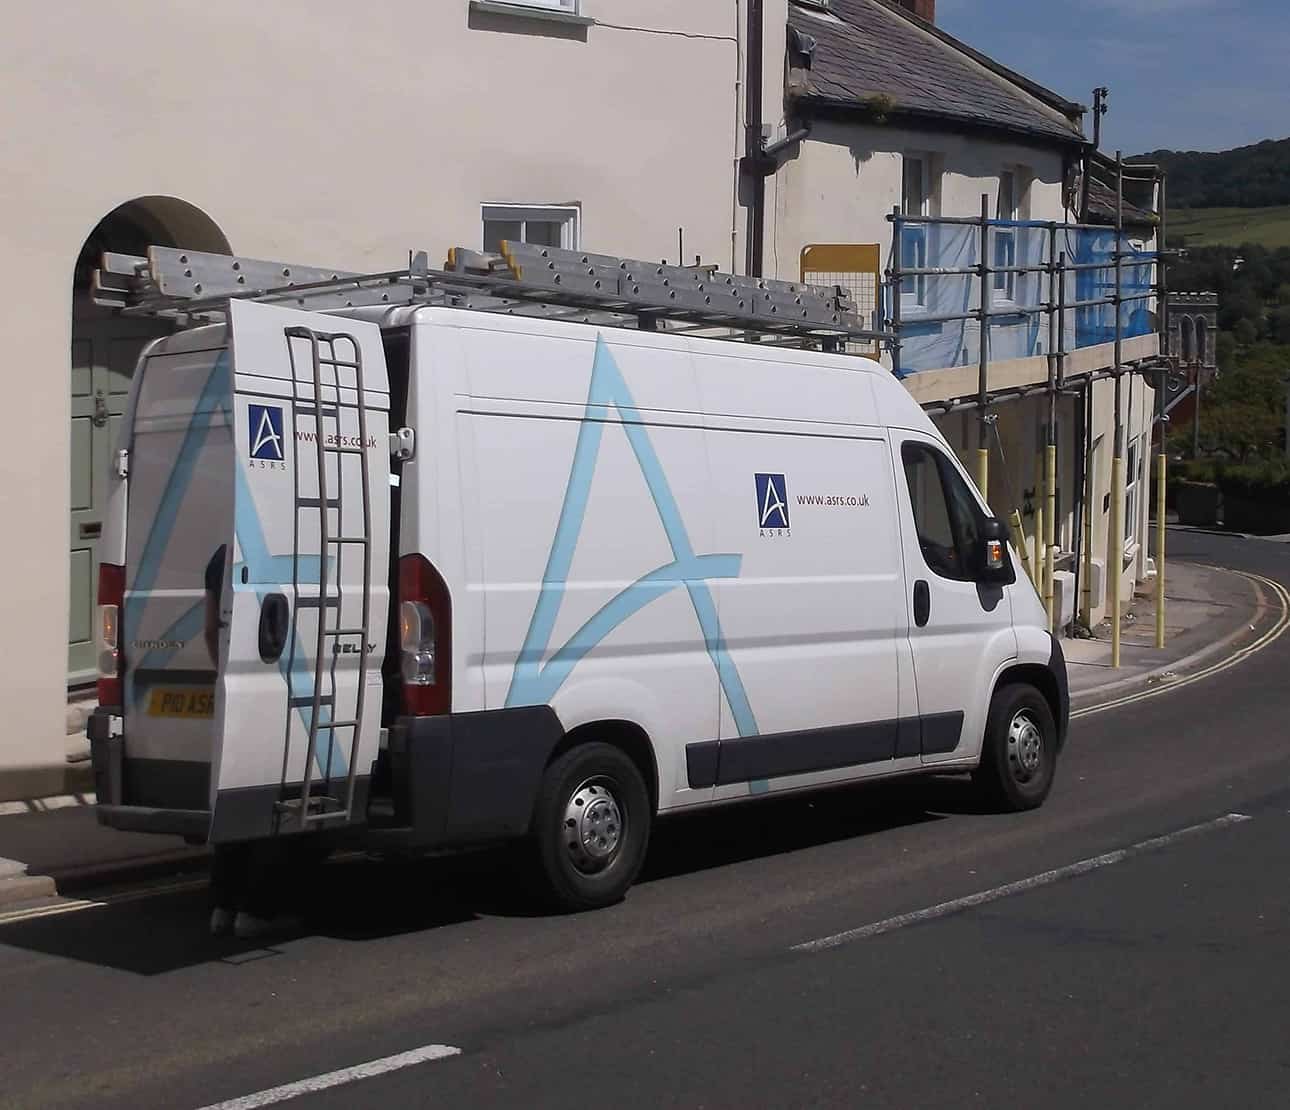 picture of ASRS van outside residential property